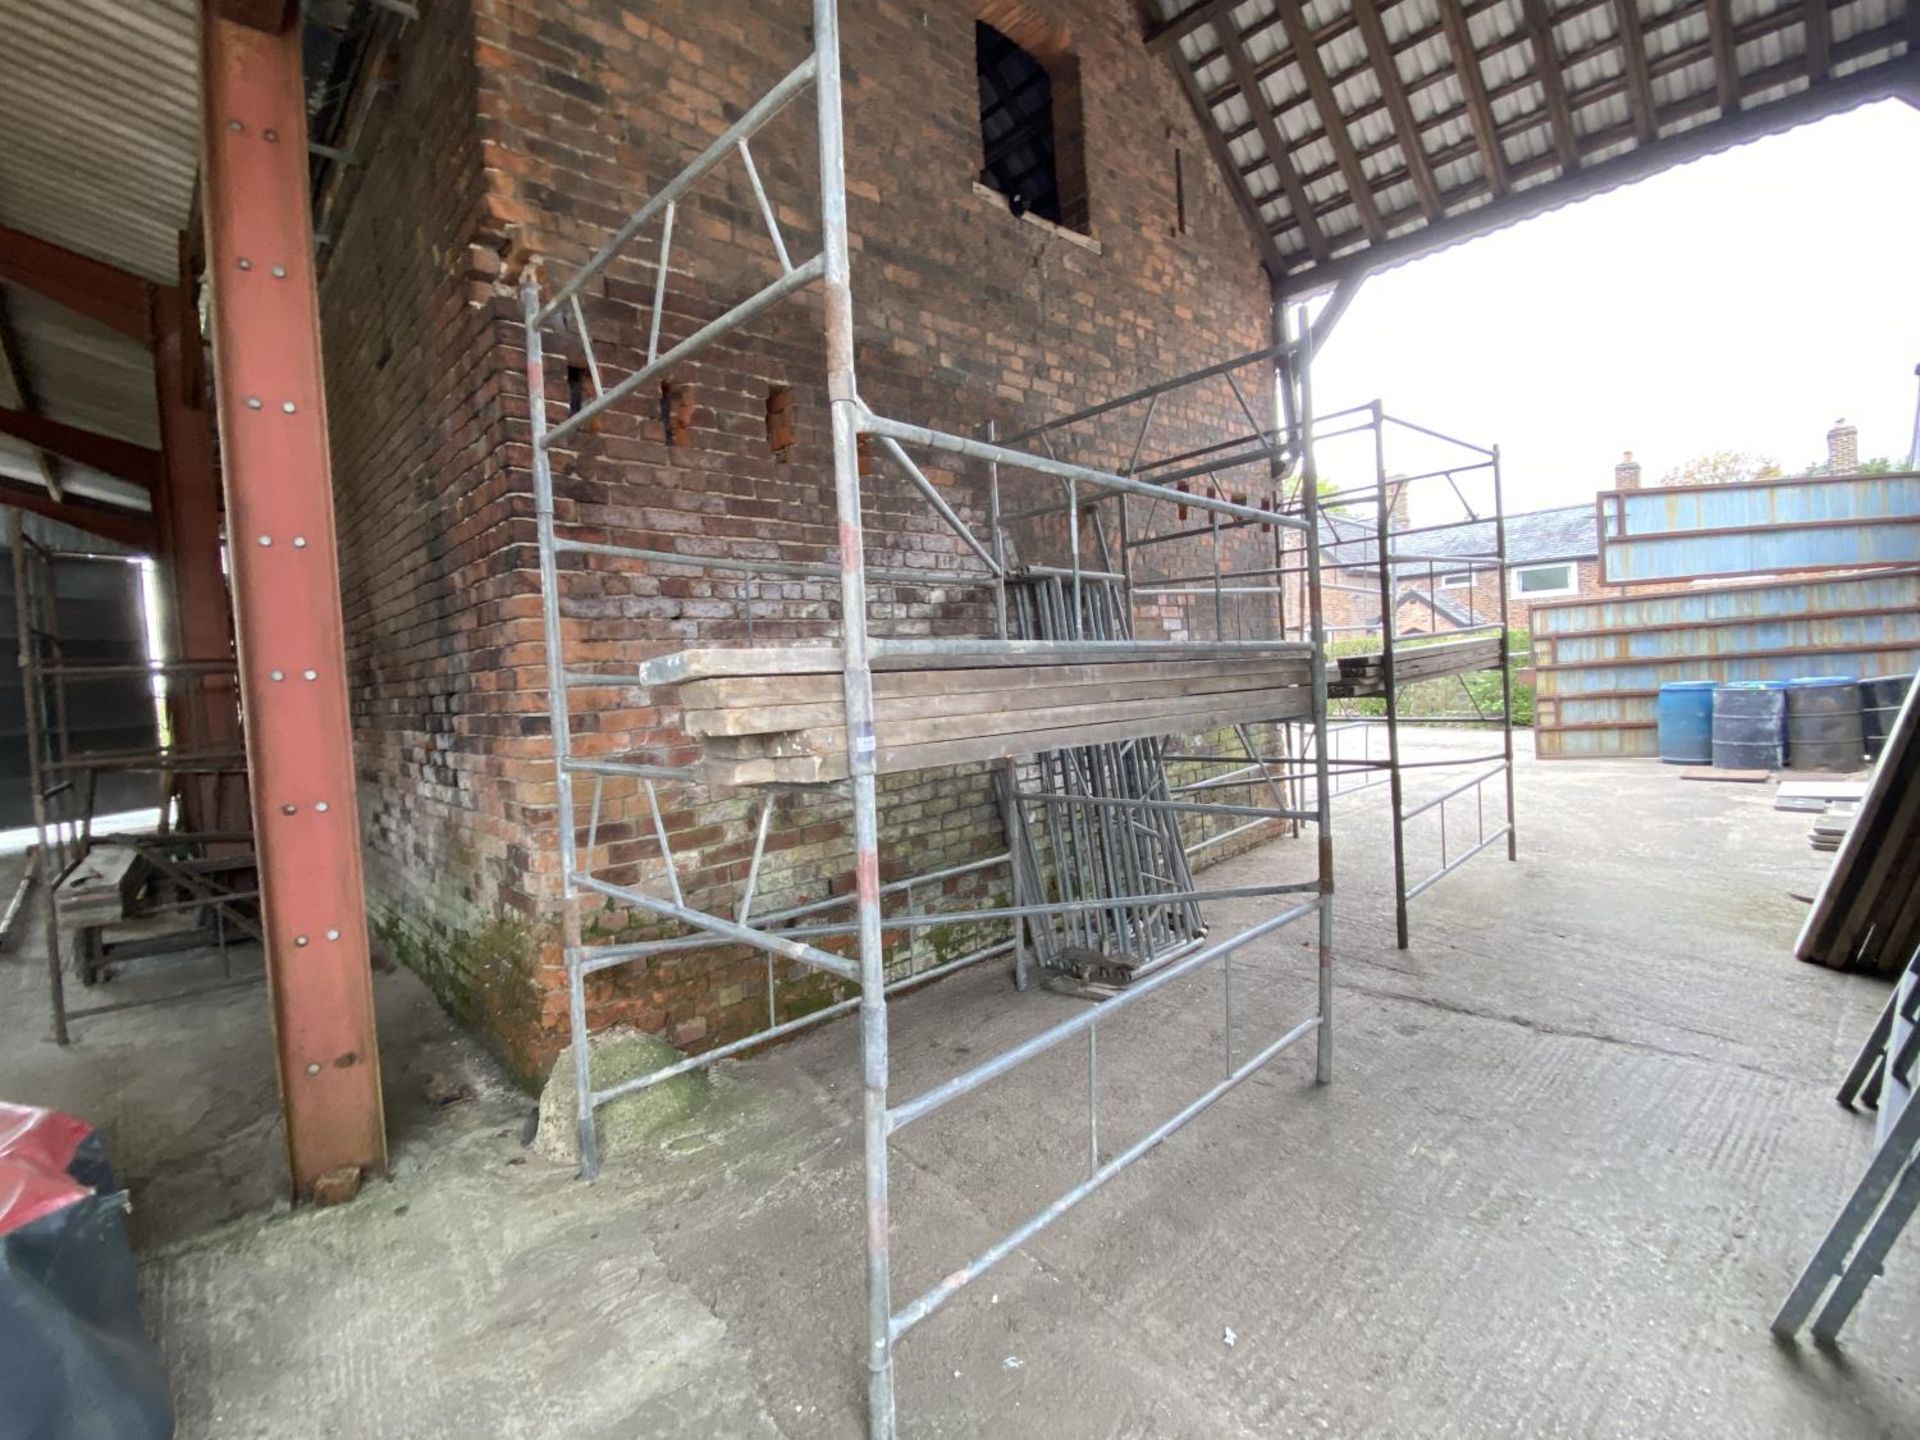 13 SECTIONS SCAFFOLD TOWER WITH 4 JACK LEGS, 2' STABILIZERS AND TIMBER PLATFORM TO REACH 30'